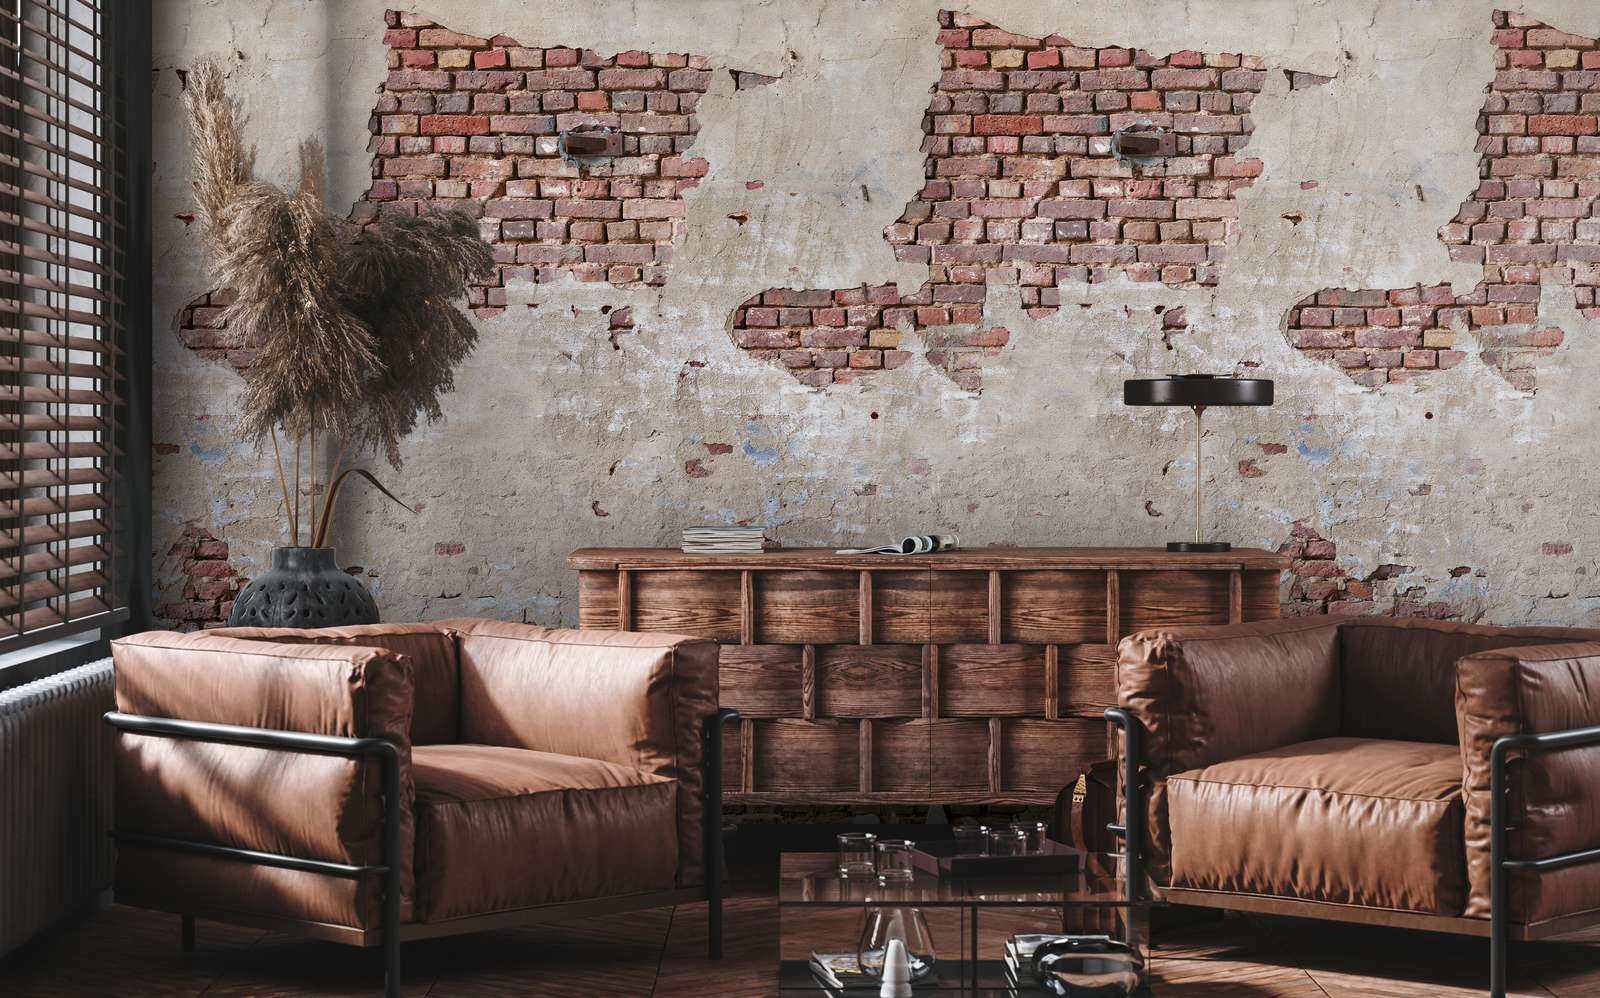             Brick wall wallpaper with plaster in abstract look - beige, red, brown
        